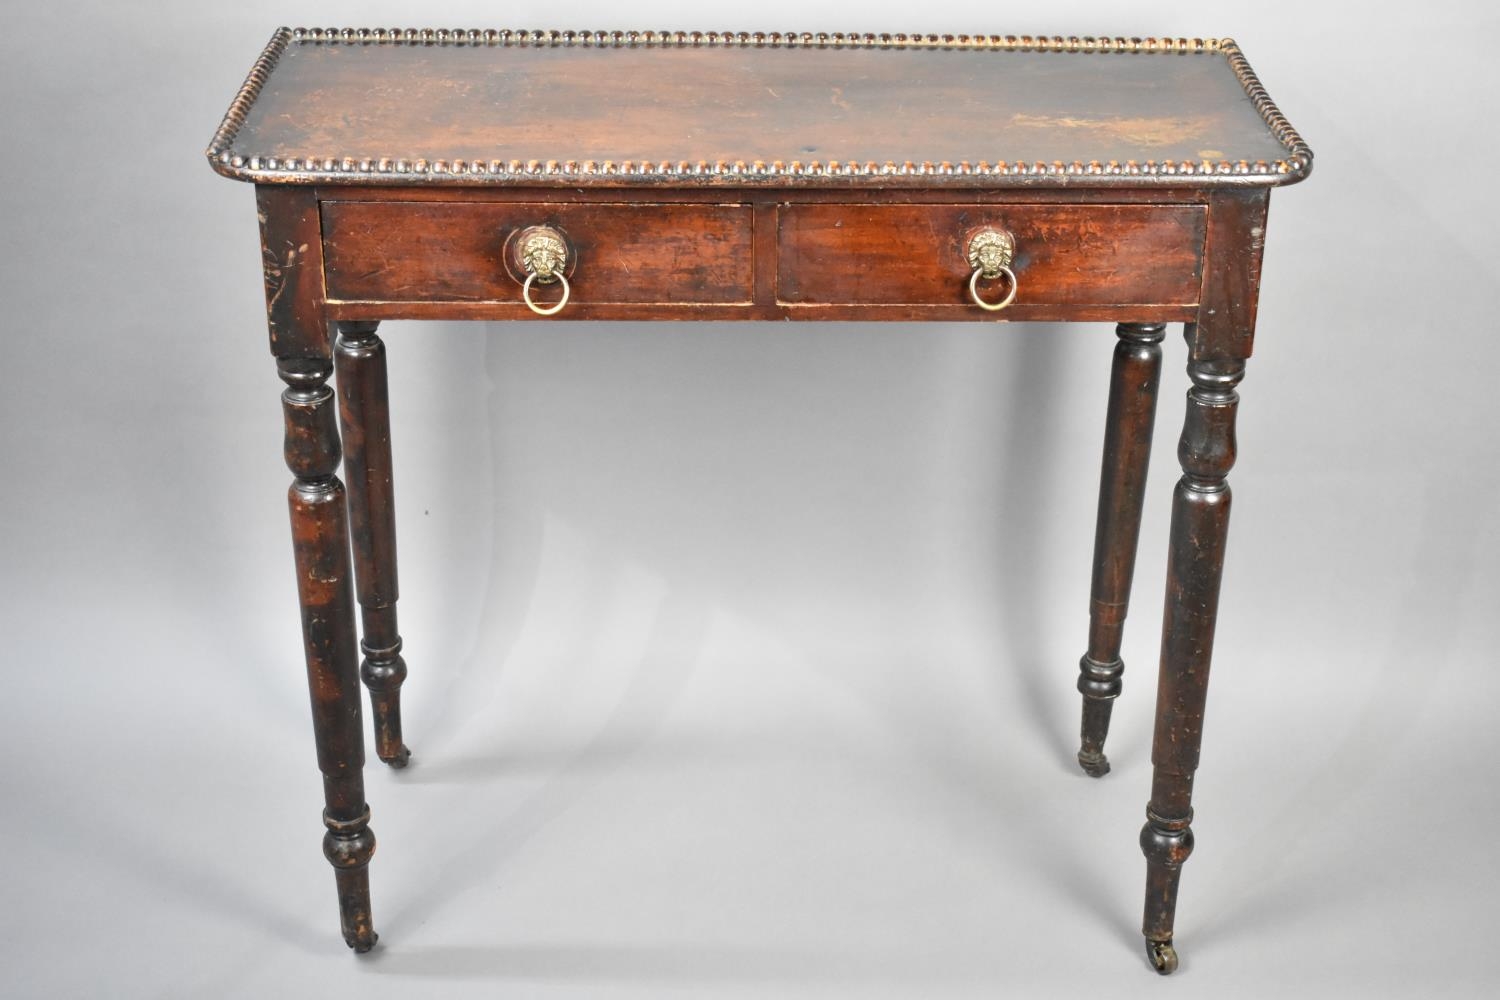 A Late 19th/Early 20th Century Mahogany Side Table with Two Short Drawers Having Lion Mask Ring